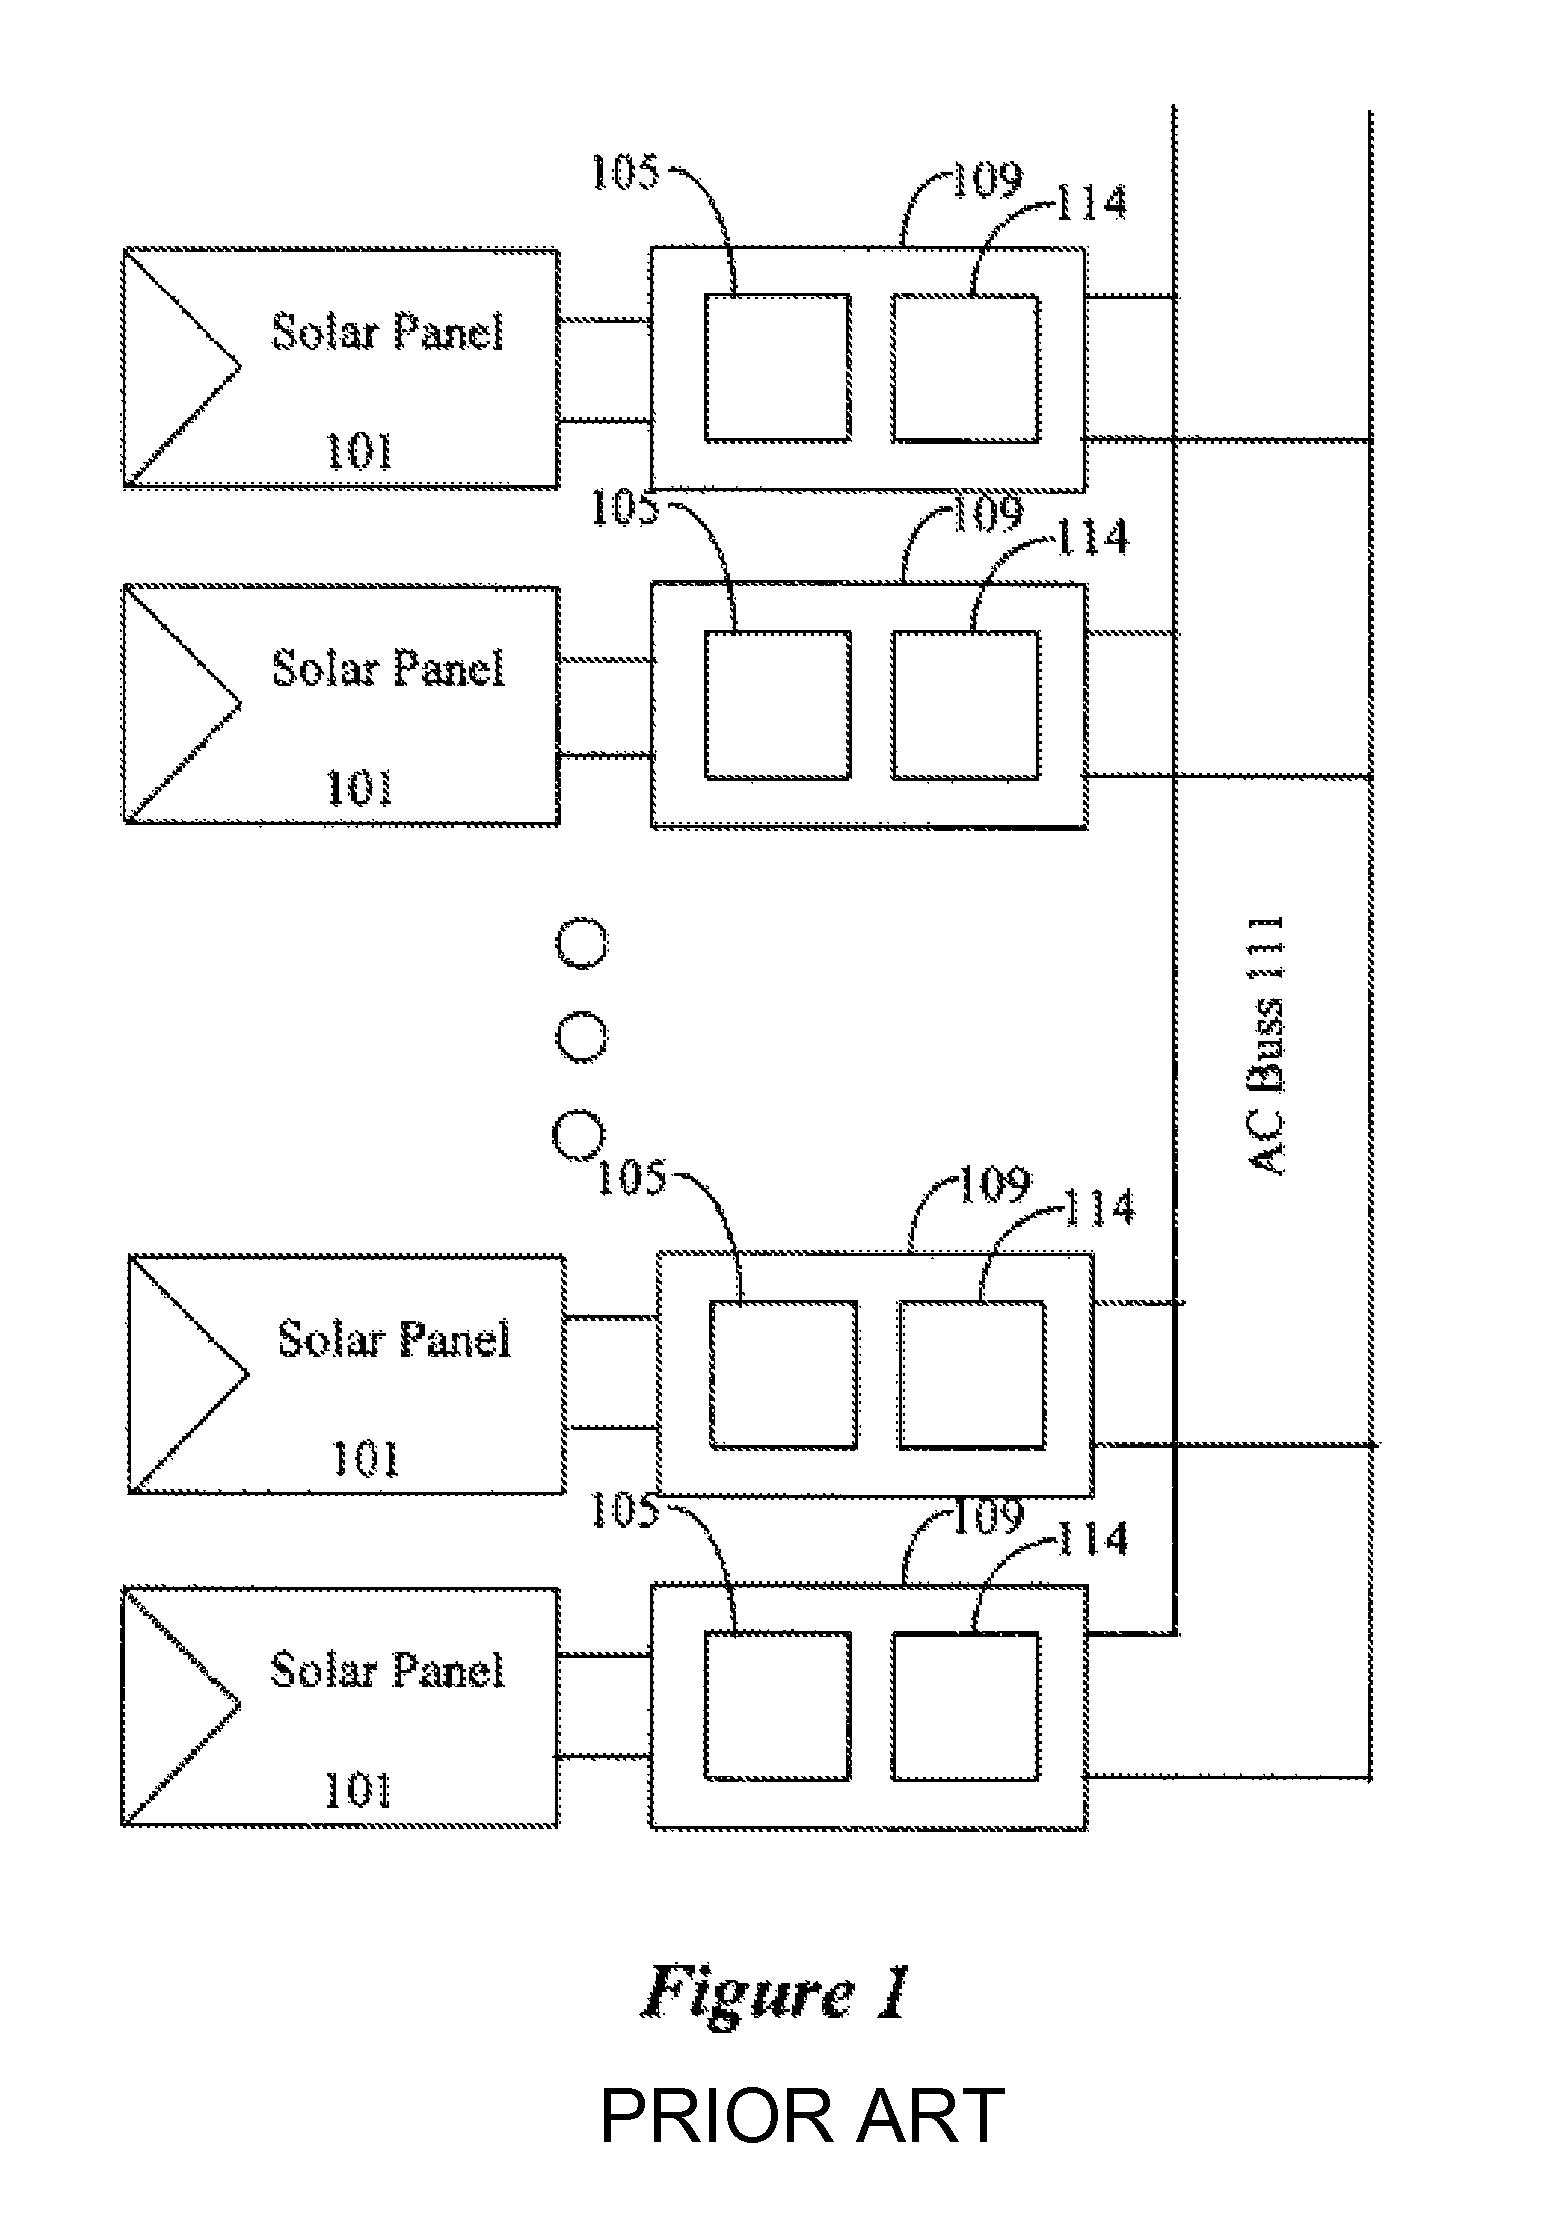 Current bypass for distributed power harvesting systems using DC power sources